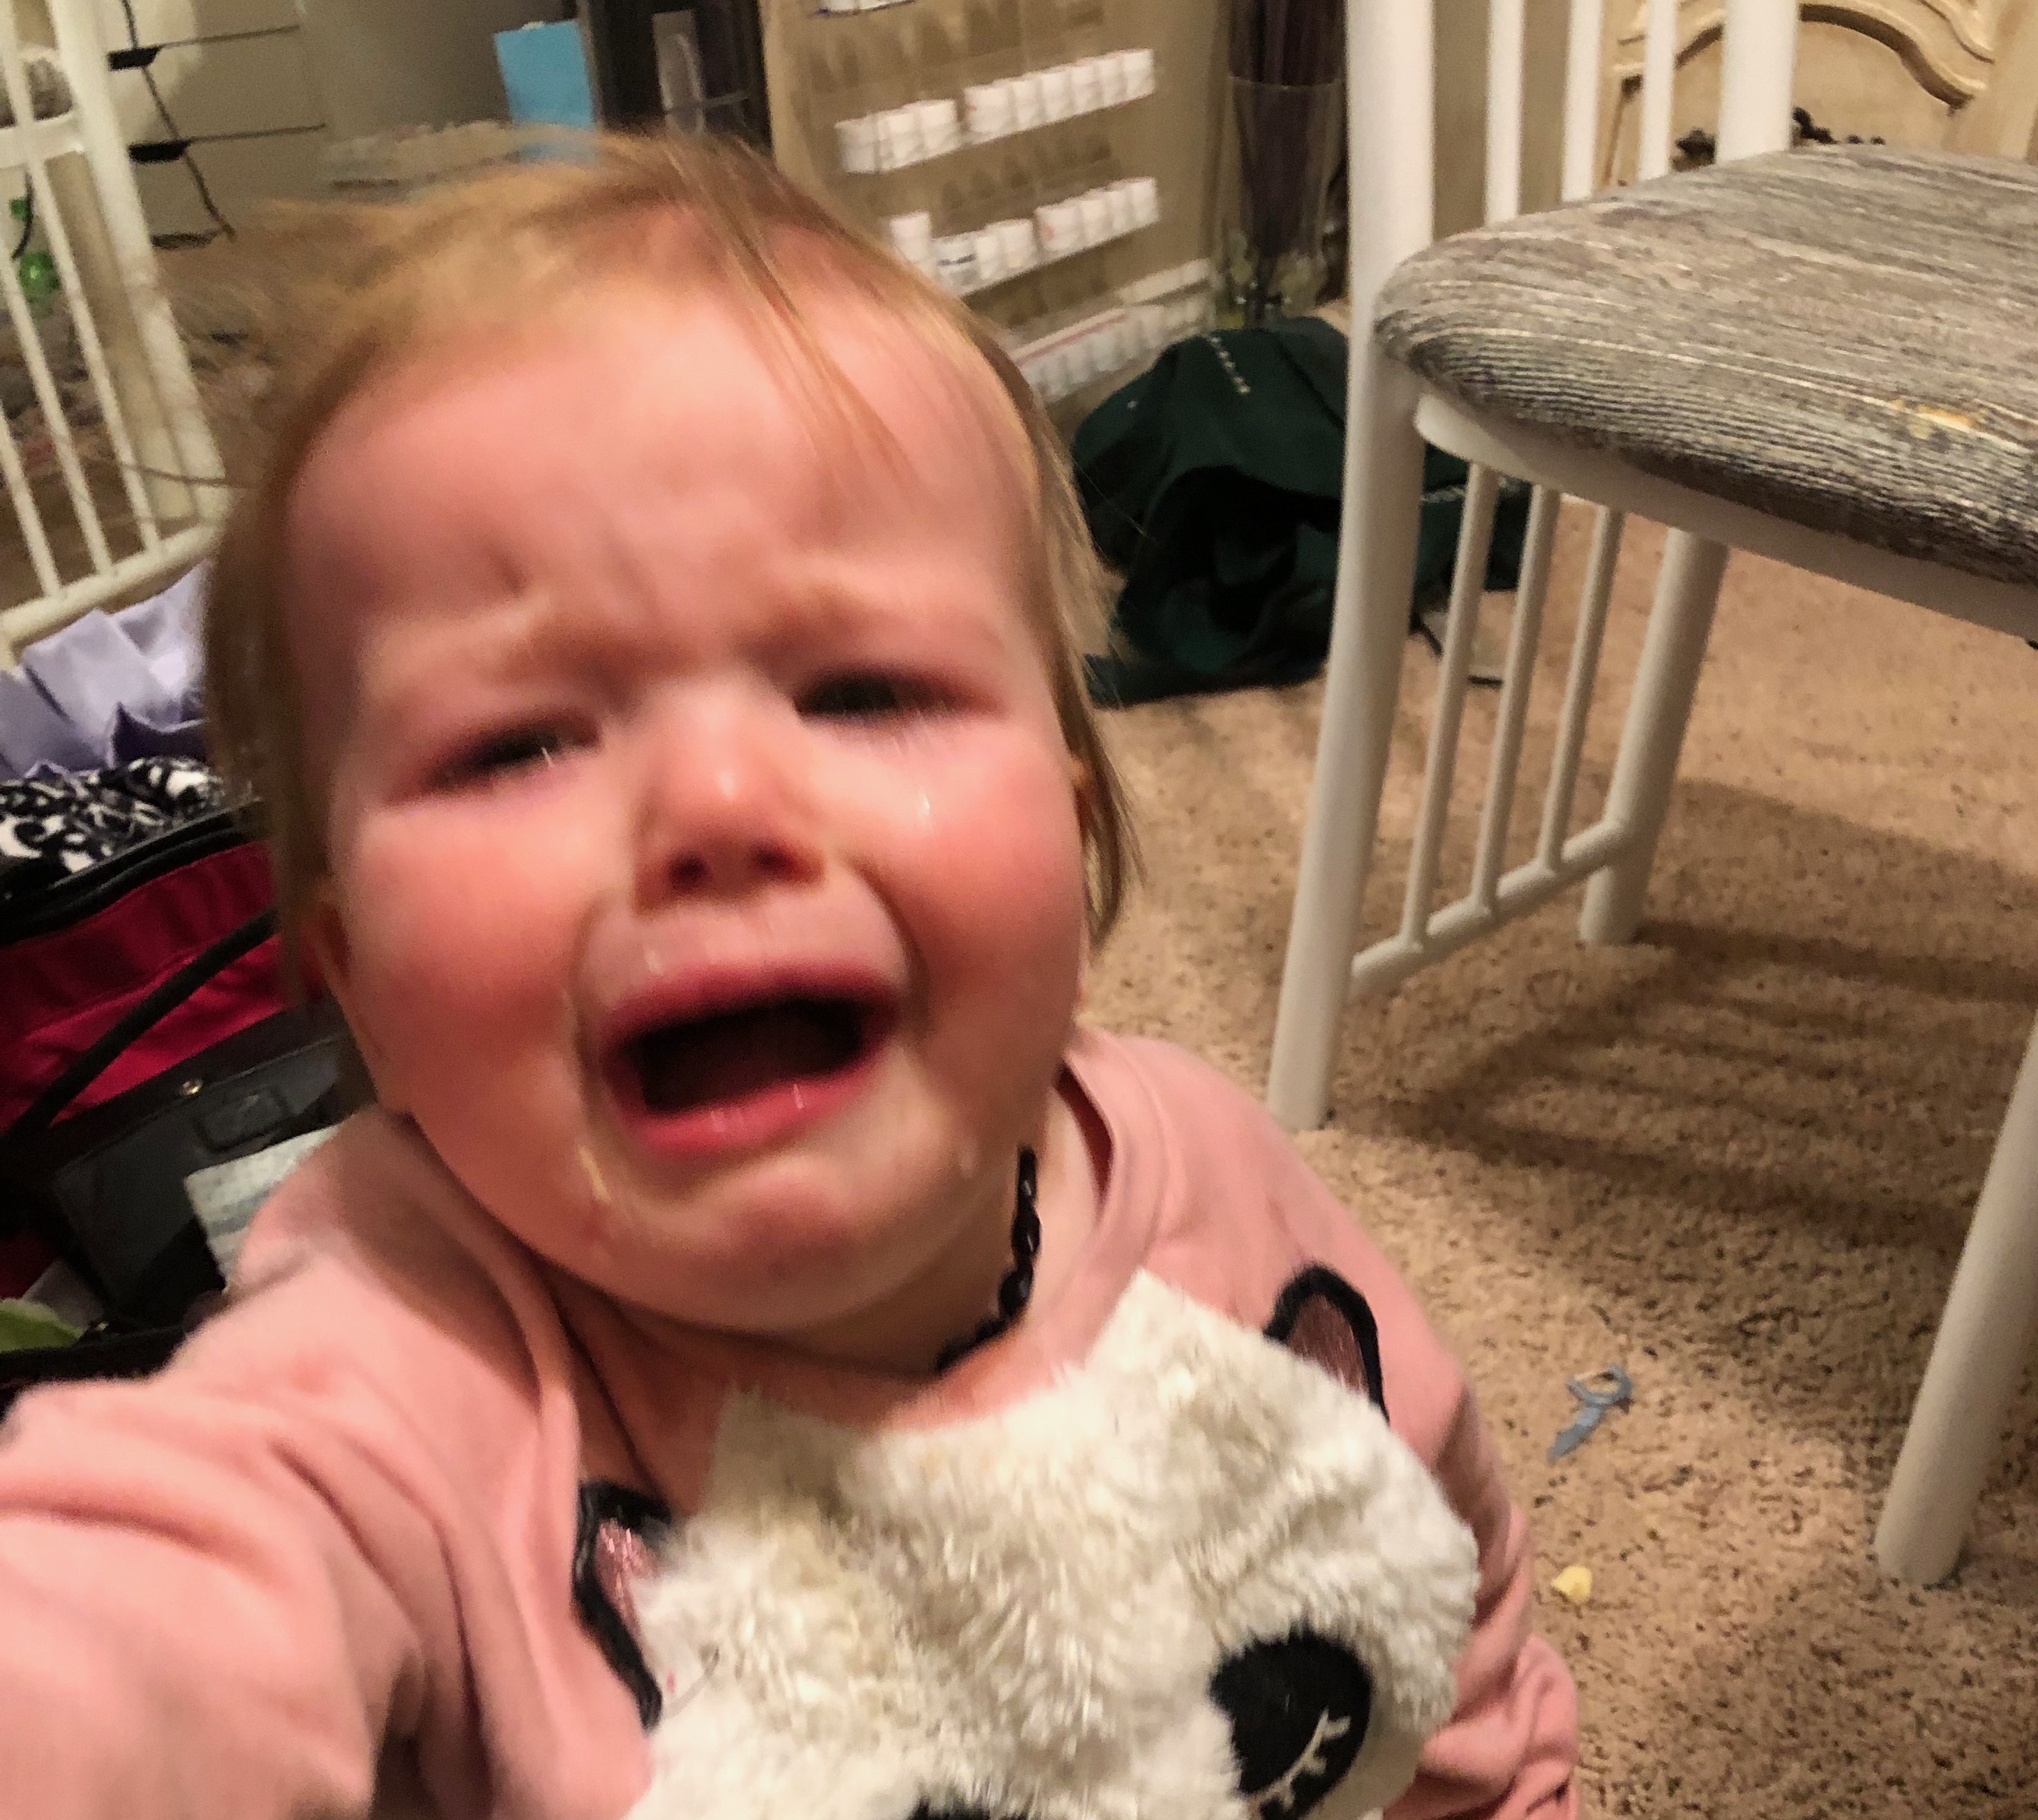 Dealing with Temper Tantrums in our toddlers without losing it